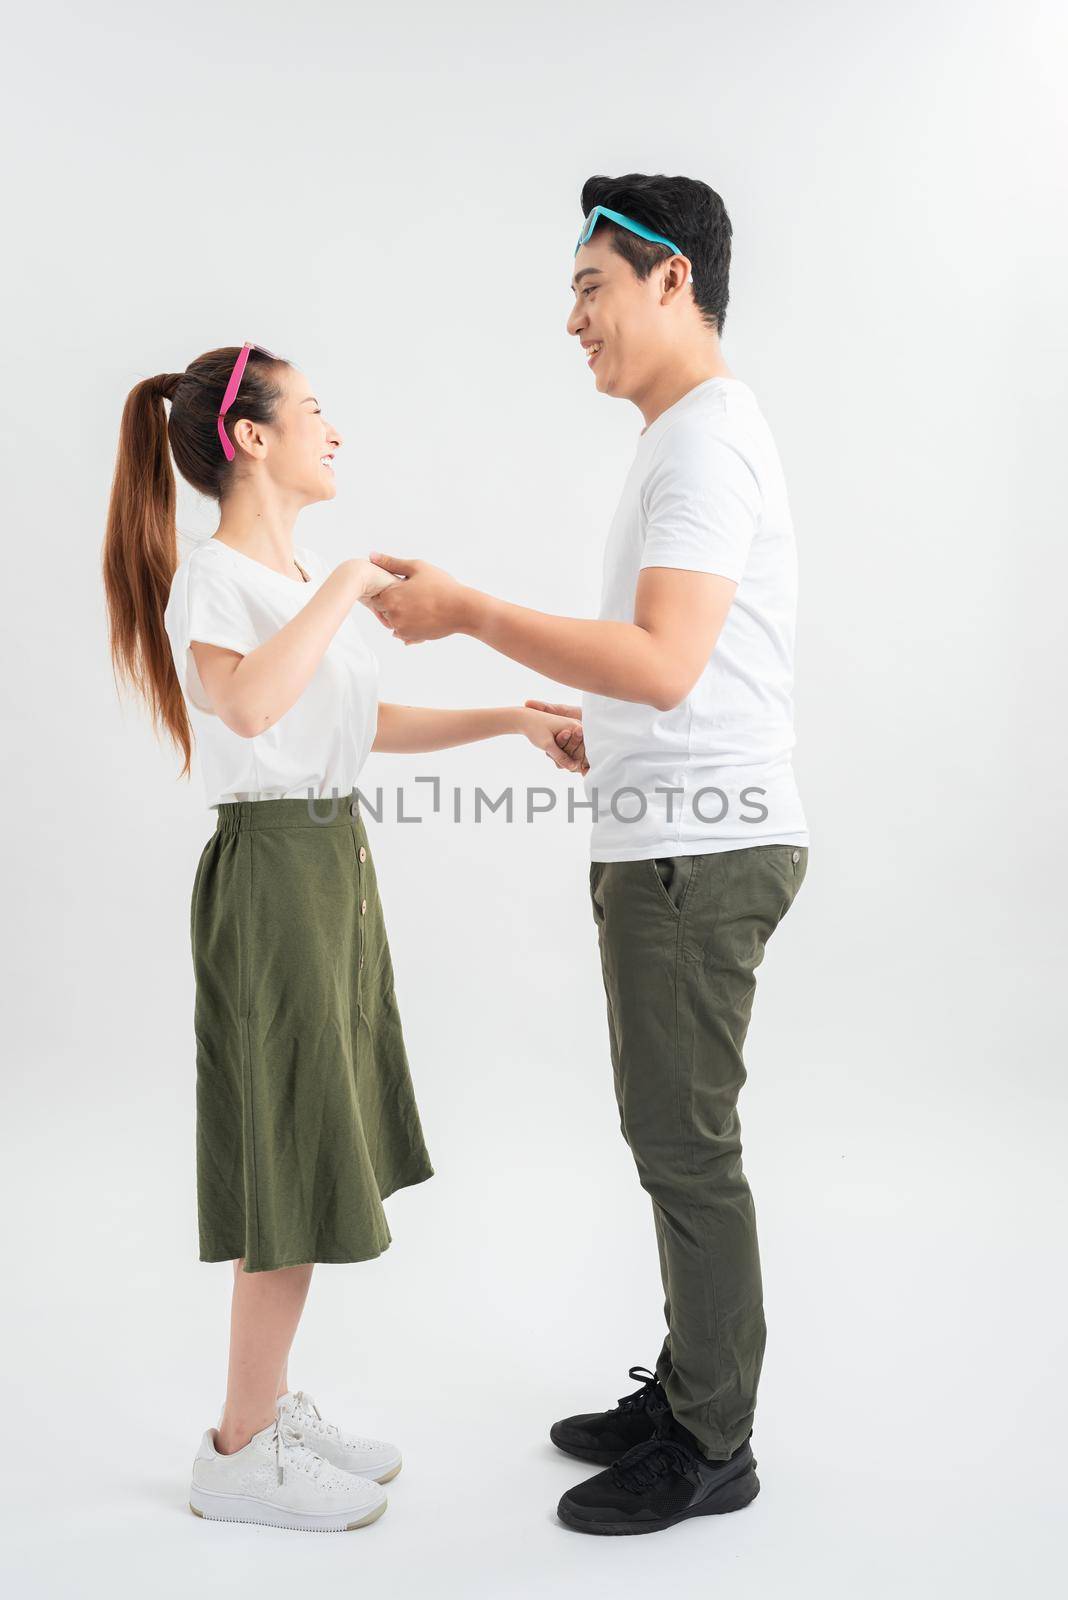 Smiling couple dancing and holding hands, isolated on white